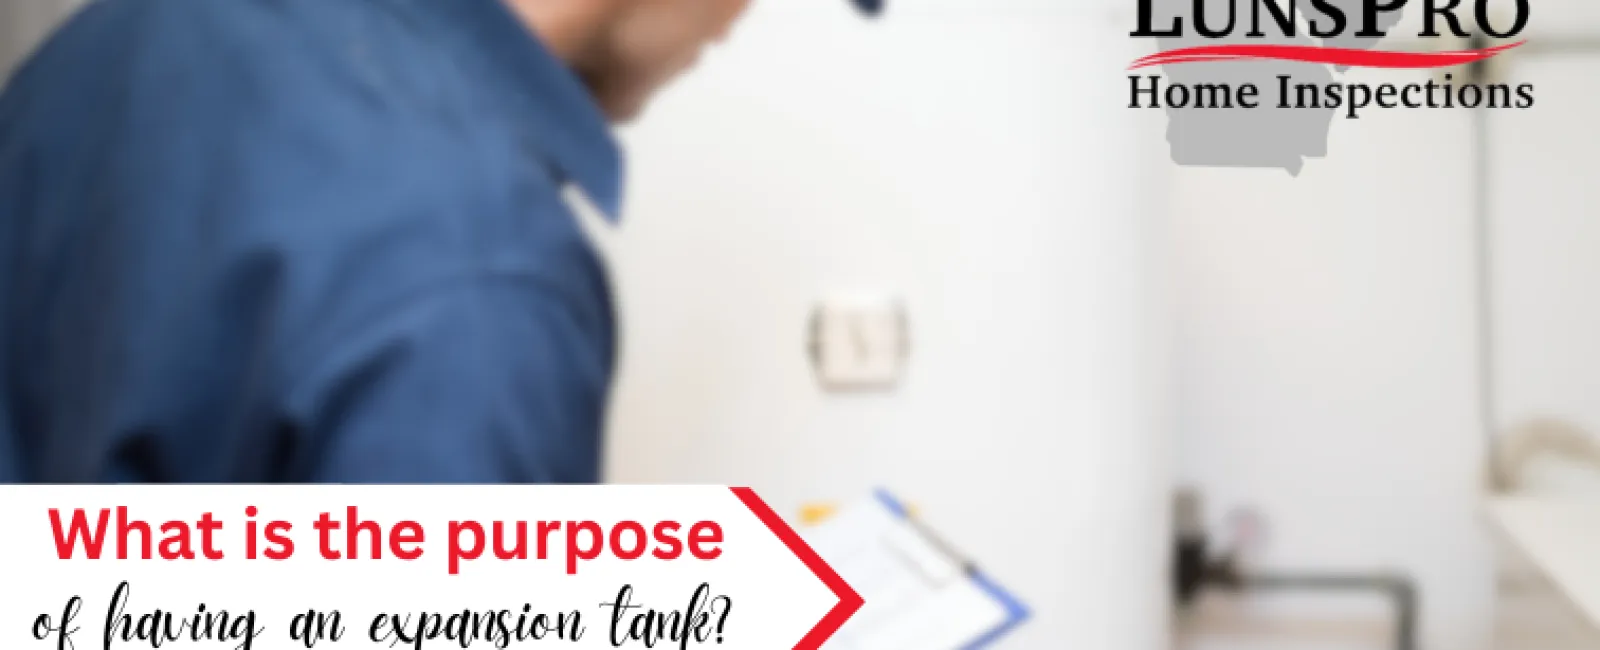 What is the purpose of having an expansion tank?